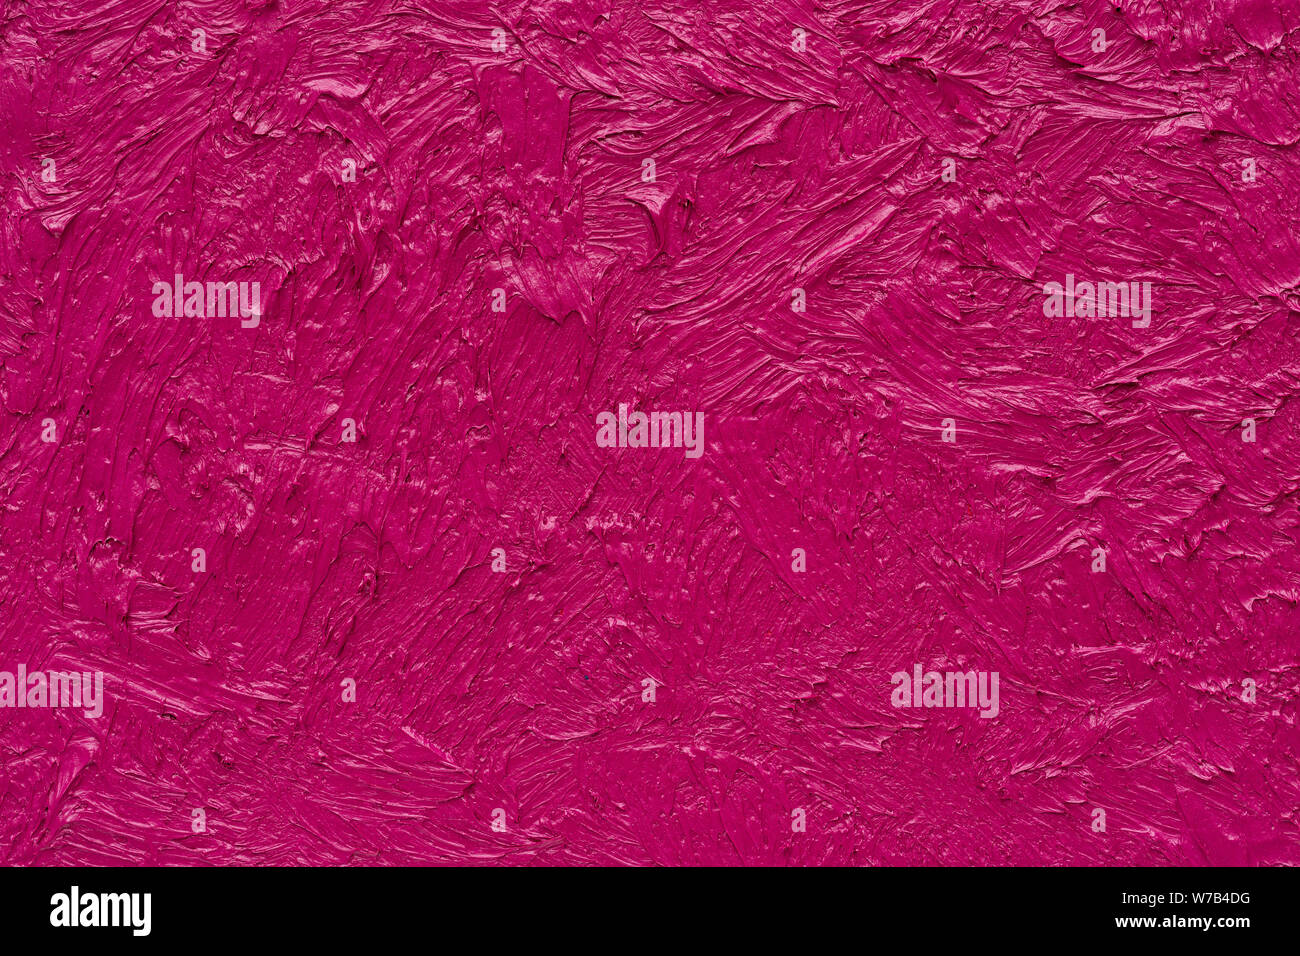 Abstract oil painting background. Background was painted with red magenta oil color on canvas by hand. Stock Photo